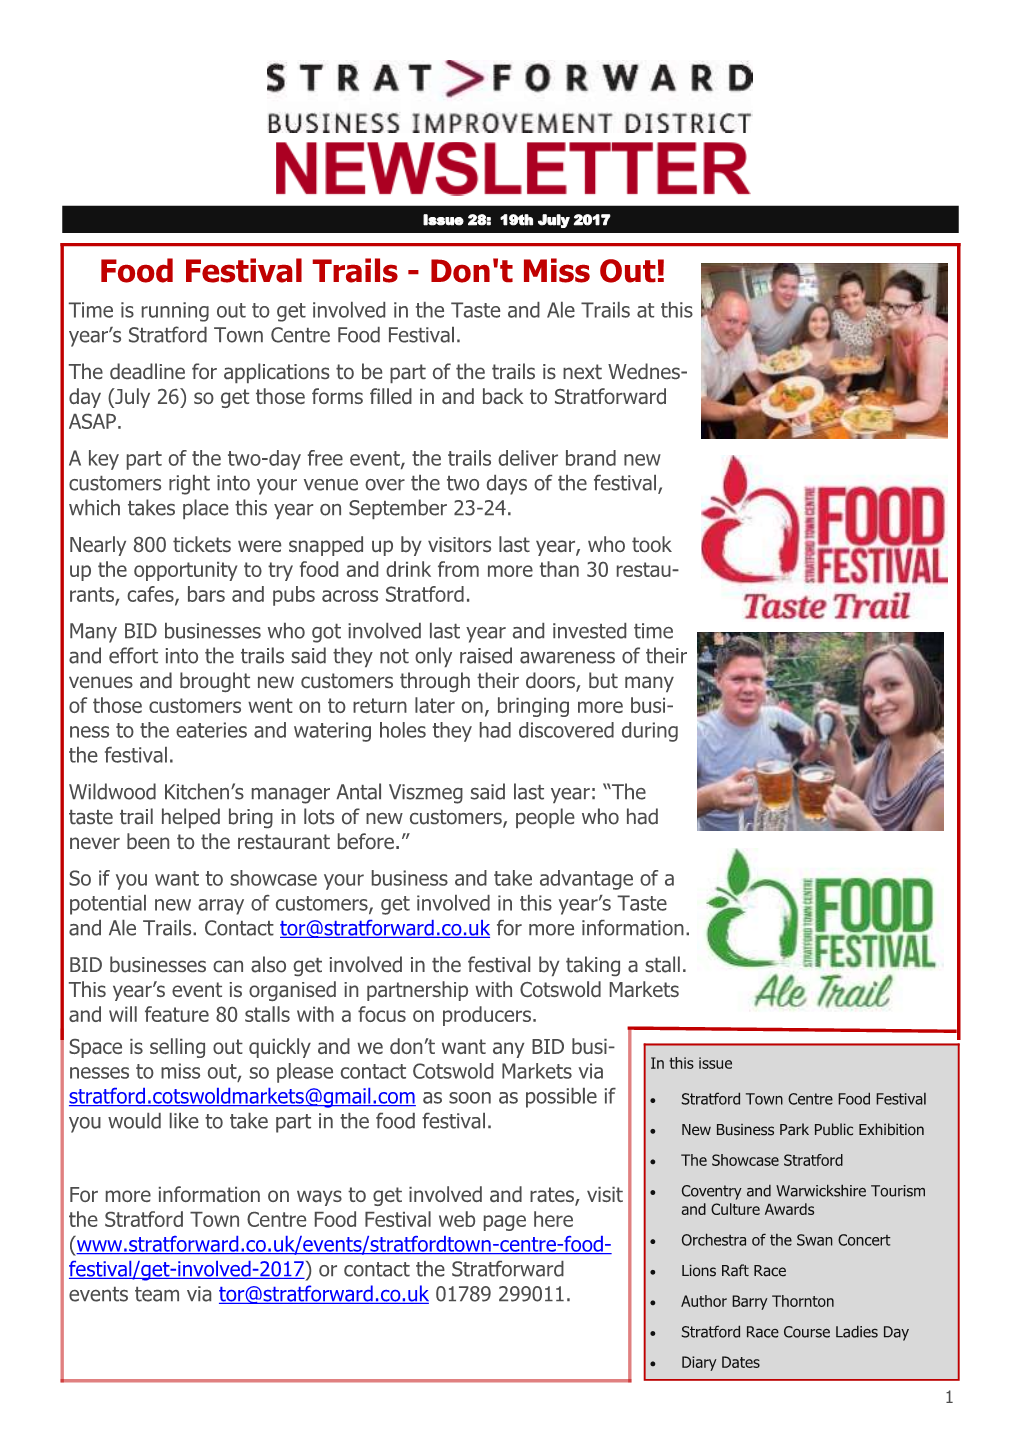 Food Festival Trails - Don't Miss Out! Time Is Running out to Get Involved in the Taste and Ale Trails at This Year’S Stratford Town Centre Food Festival